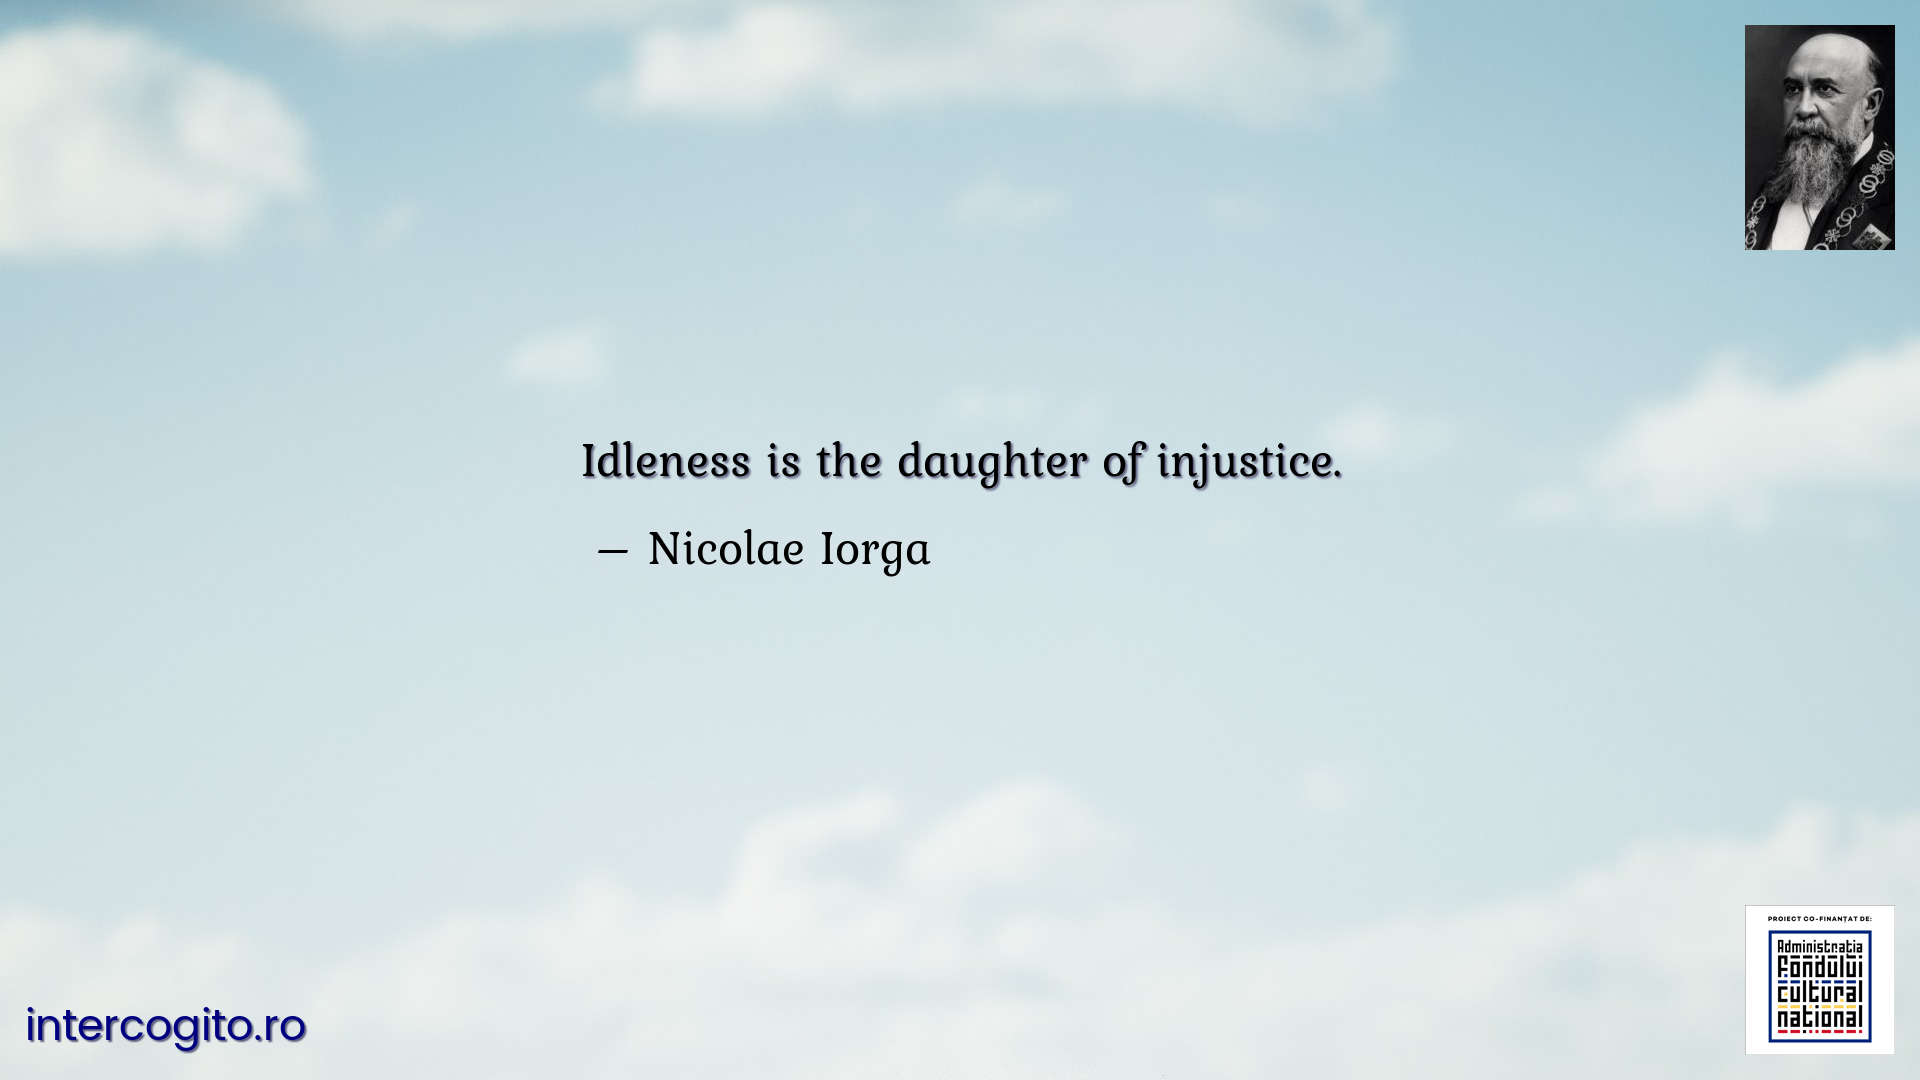 Idleness is the daughter of injustice.